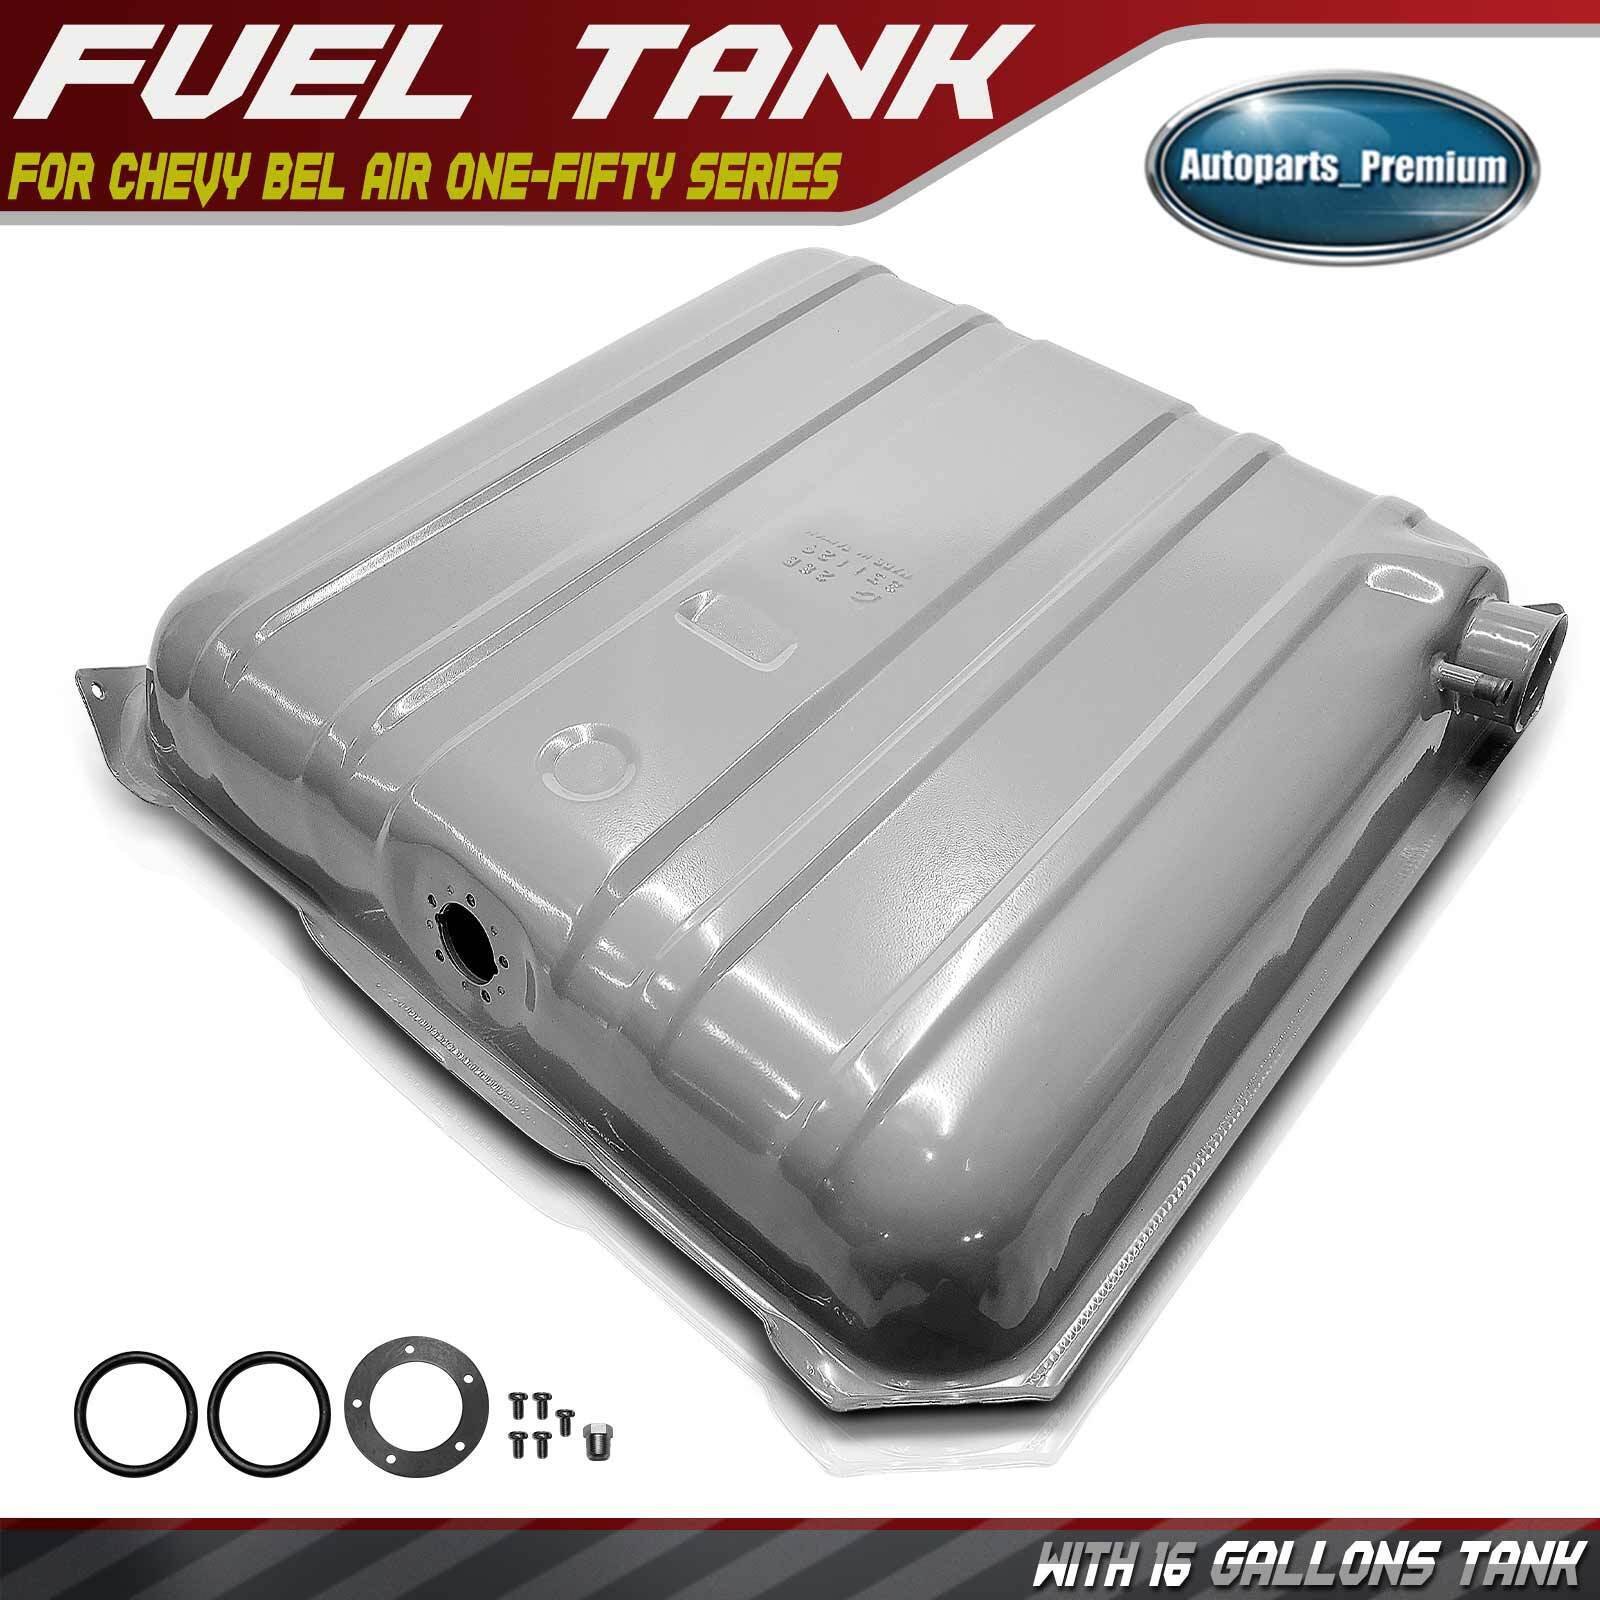 16 Gallons Fuel Tank for Chevy Bel Air One-Fifty Series Two Ten Series 1955-1956